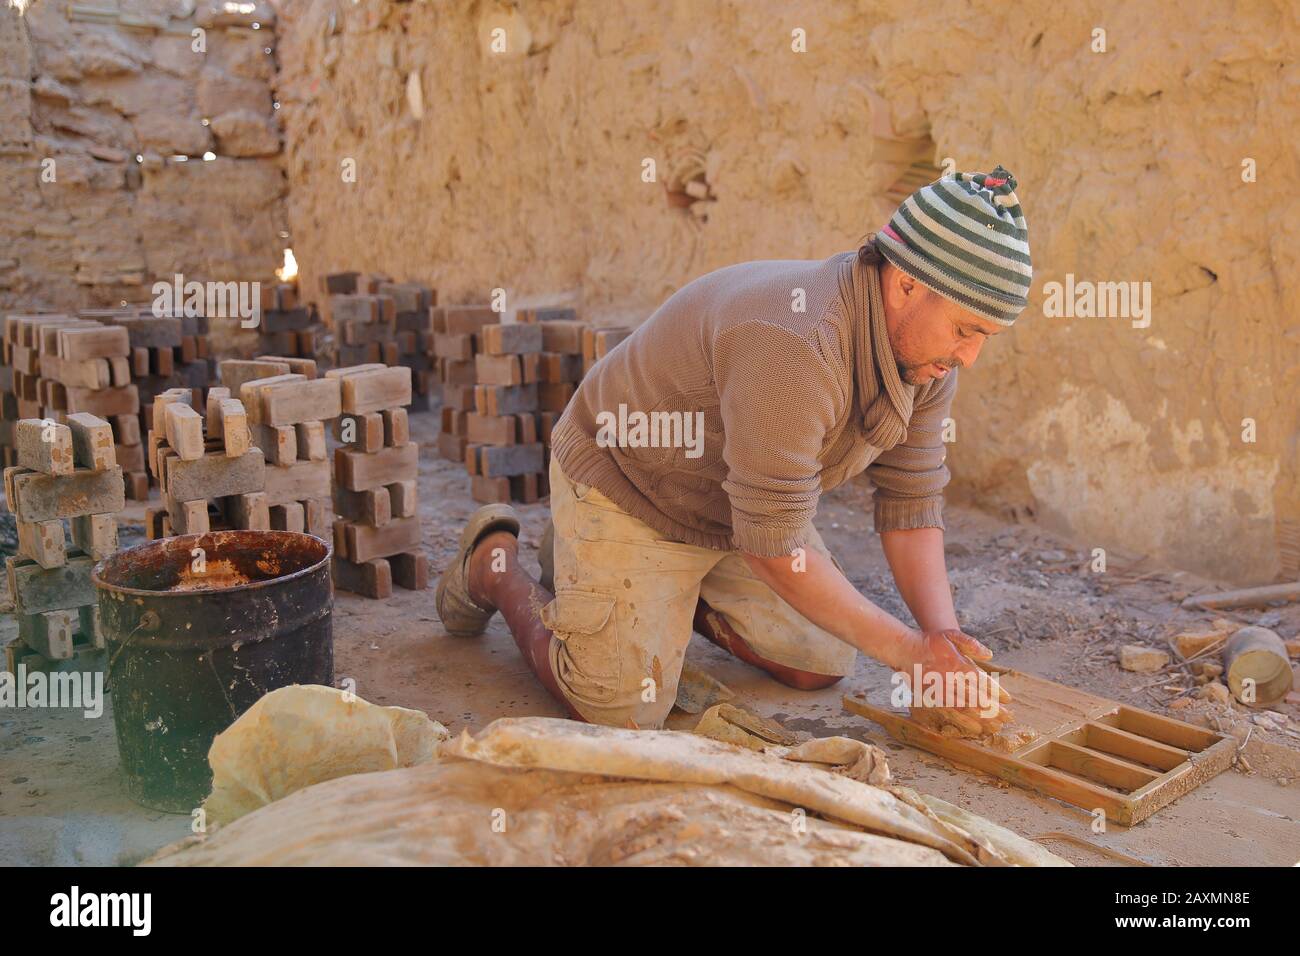 TOZEUR, TUNISIA - DECEMBER 20, 2019: A local worker making bricks in a traditional way in a brick factory. A wooden frame is used to mold the bricks. Stock Photo